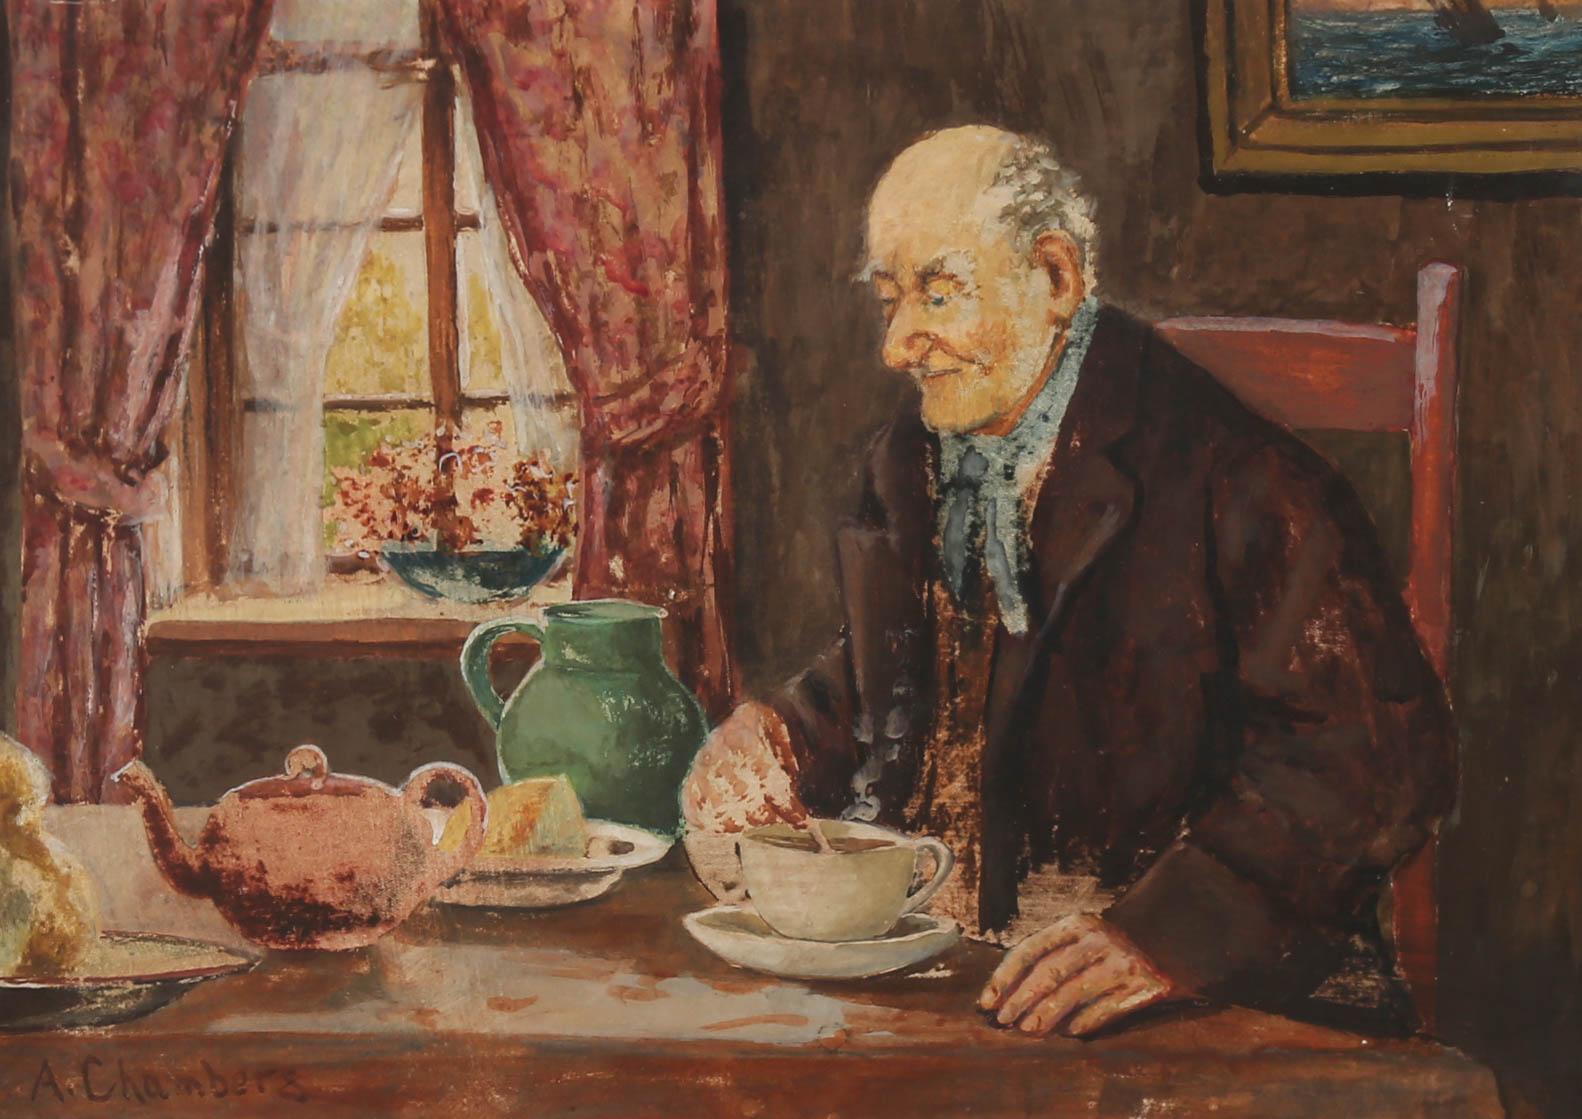 A thoroughly charming interior scene in watercolour, by early 20th century artist A. Chambers. Here, an elderly man is pictured enjoying a generous cup of tea and a slice of cake in an all frills dining room interior. Chambers has mastered a